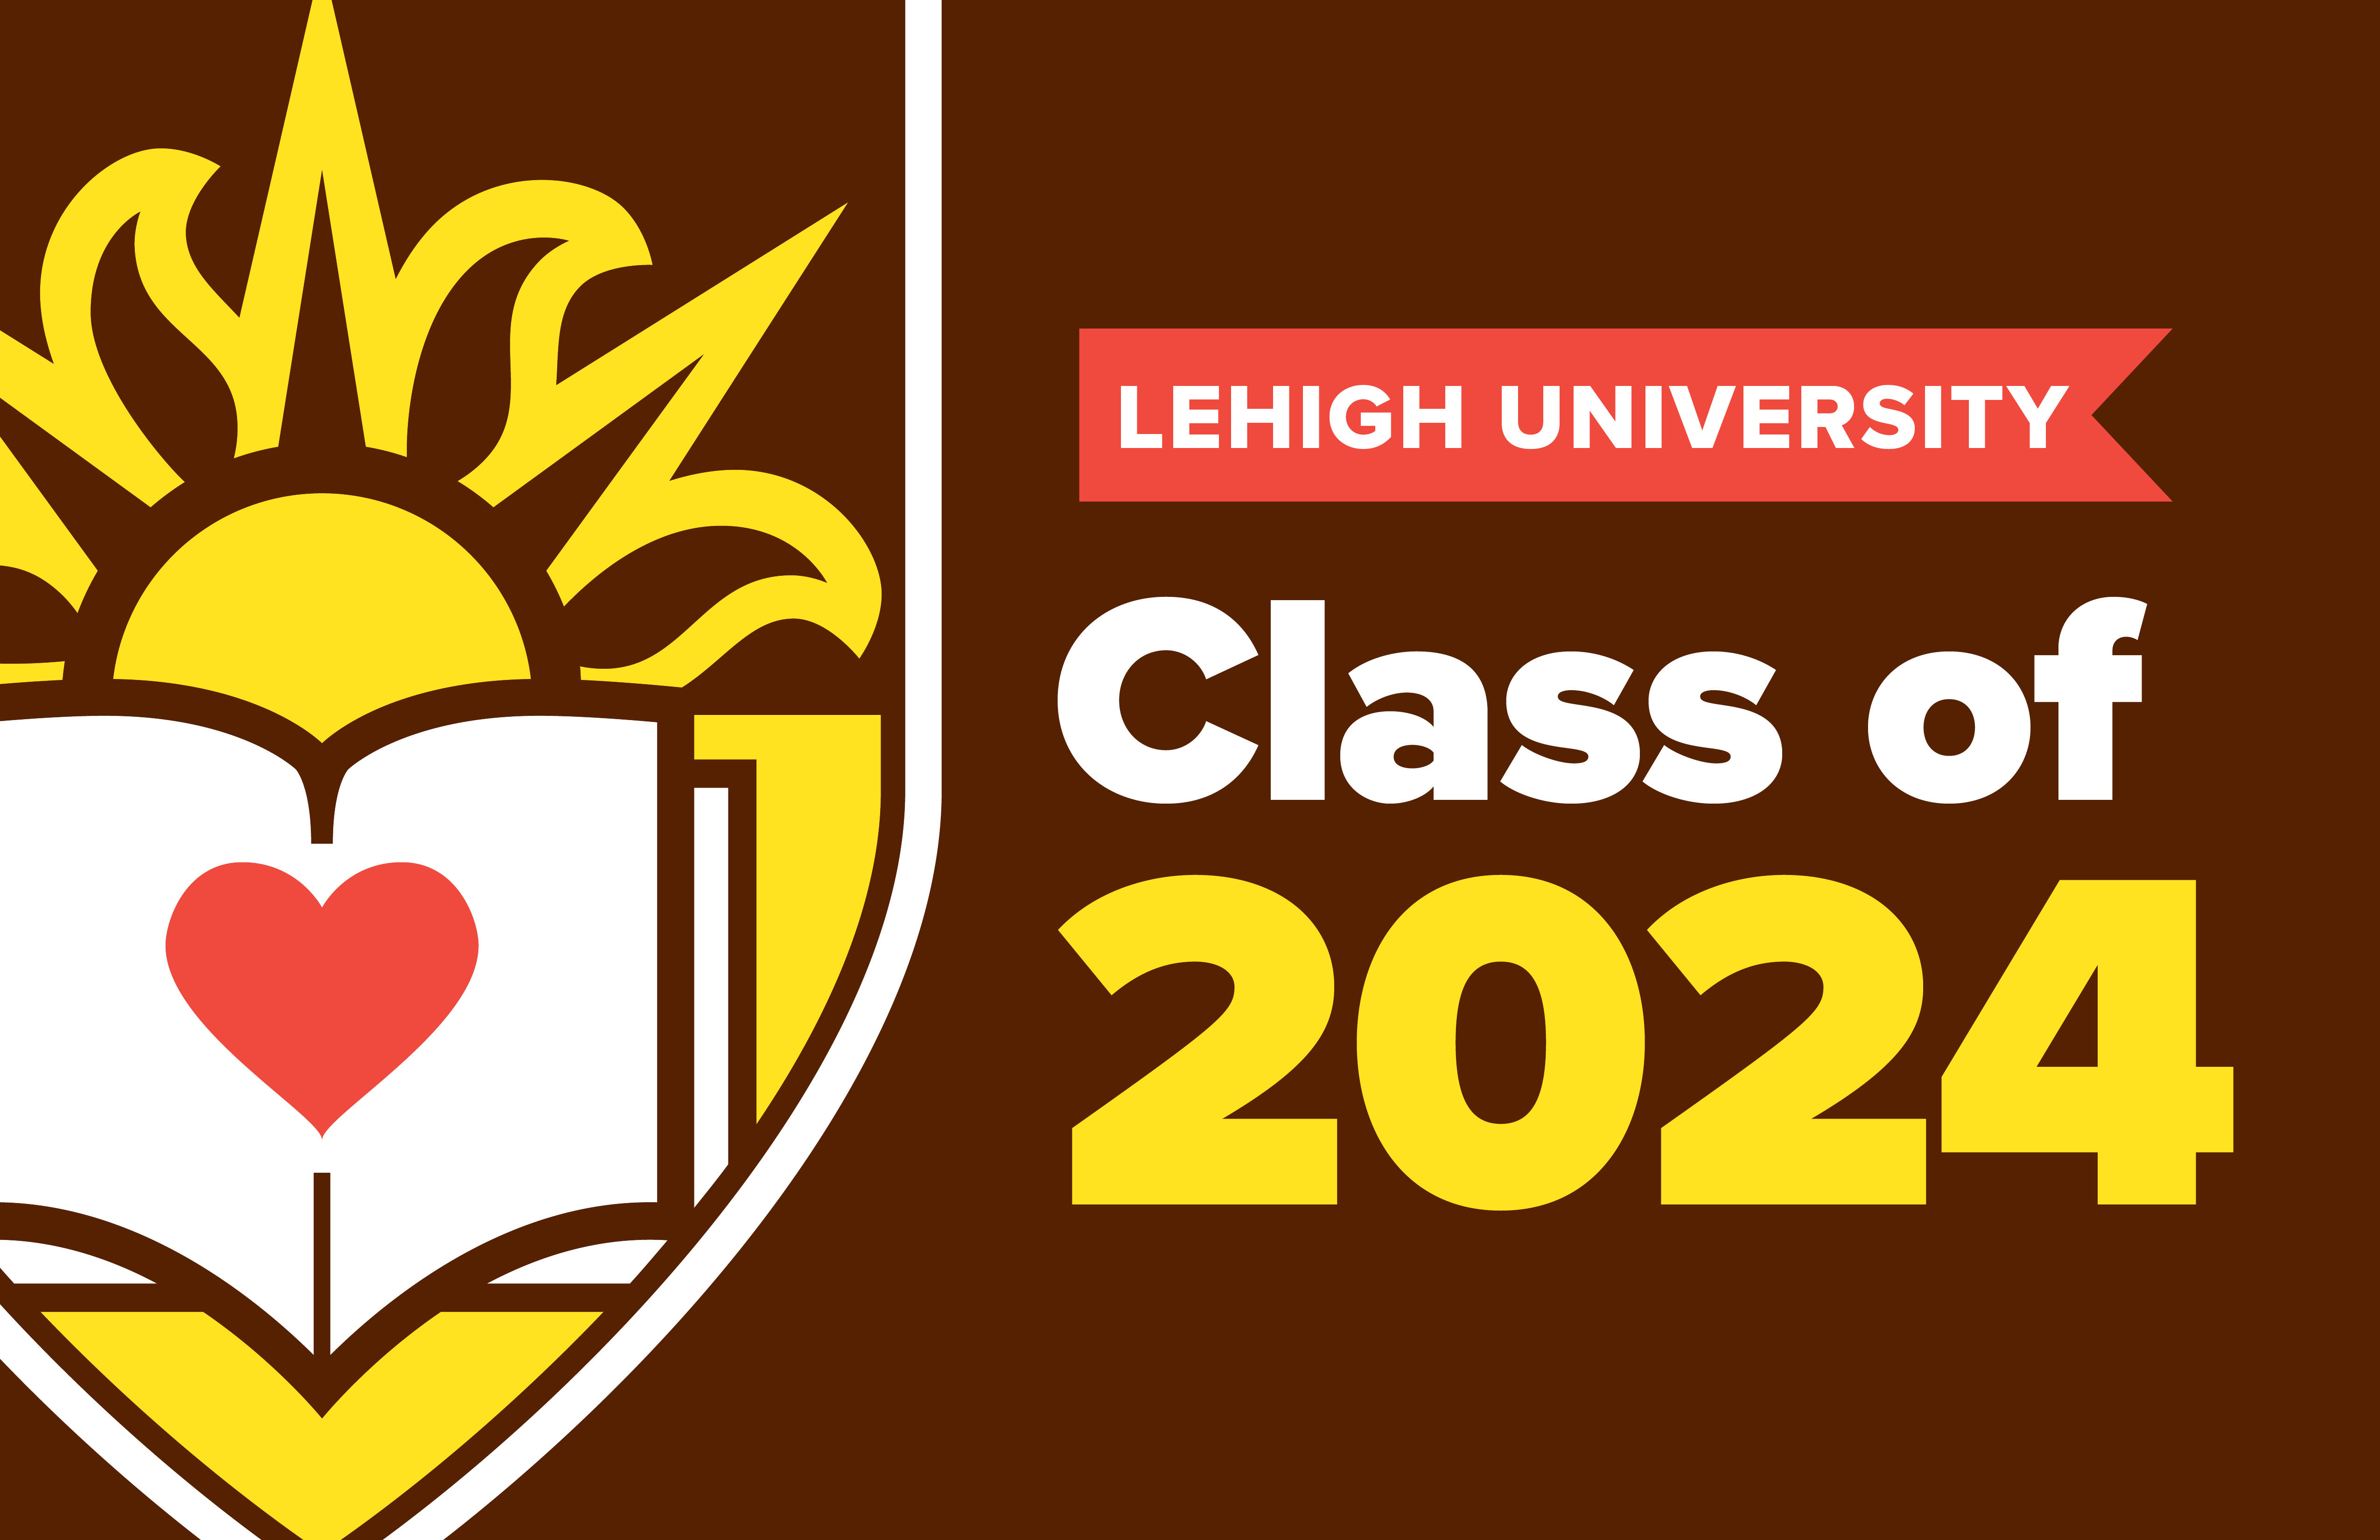 11x17 Class of 2024 Lawn sign #1